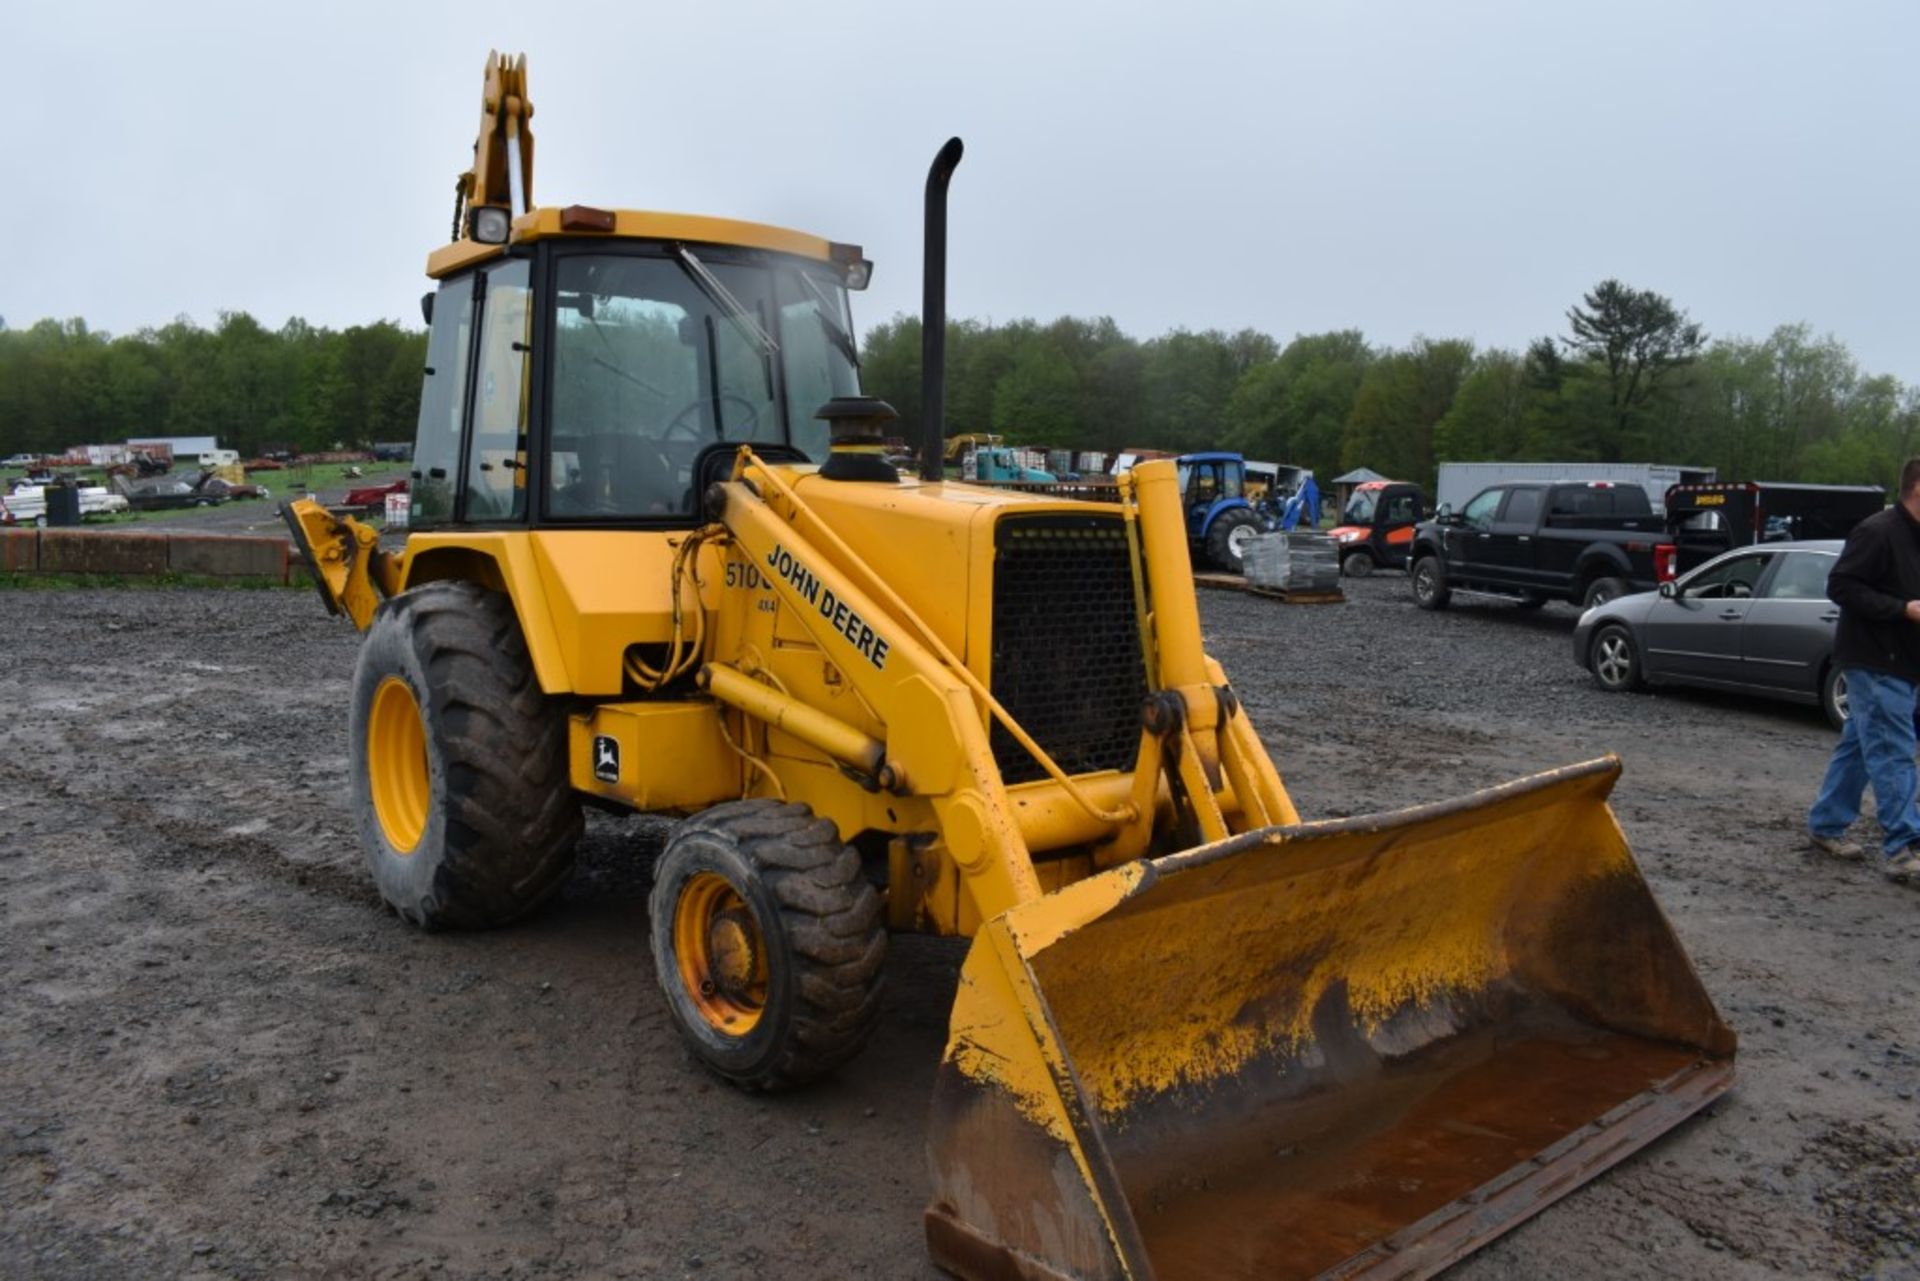 John Deere 510C Turbo Backhoe 5856 Hours, Runs and Operates, 4WD, 92" Bucket, Extendable Hoe, 24" - Image 3 of 33